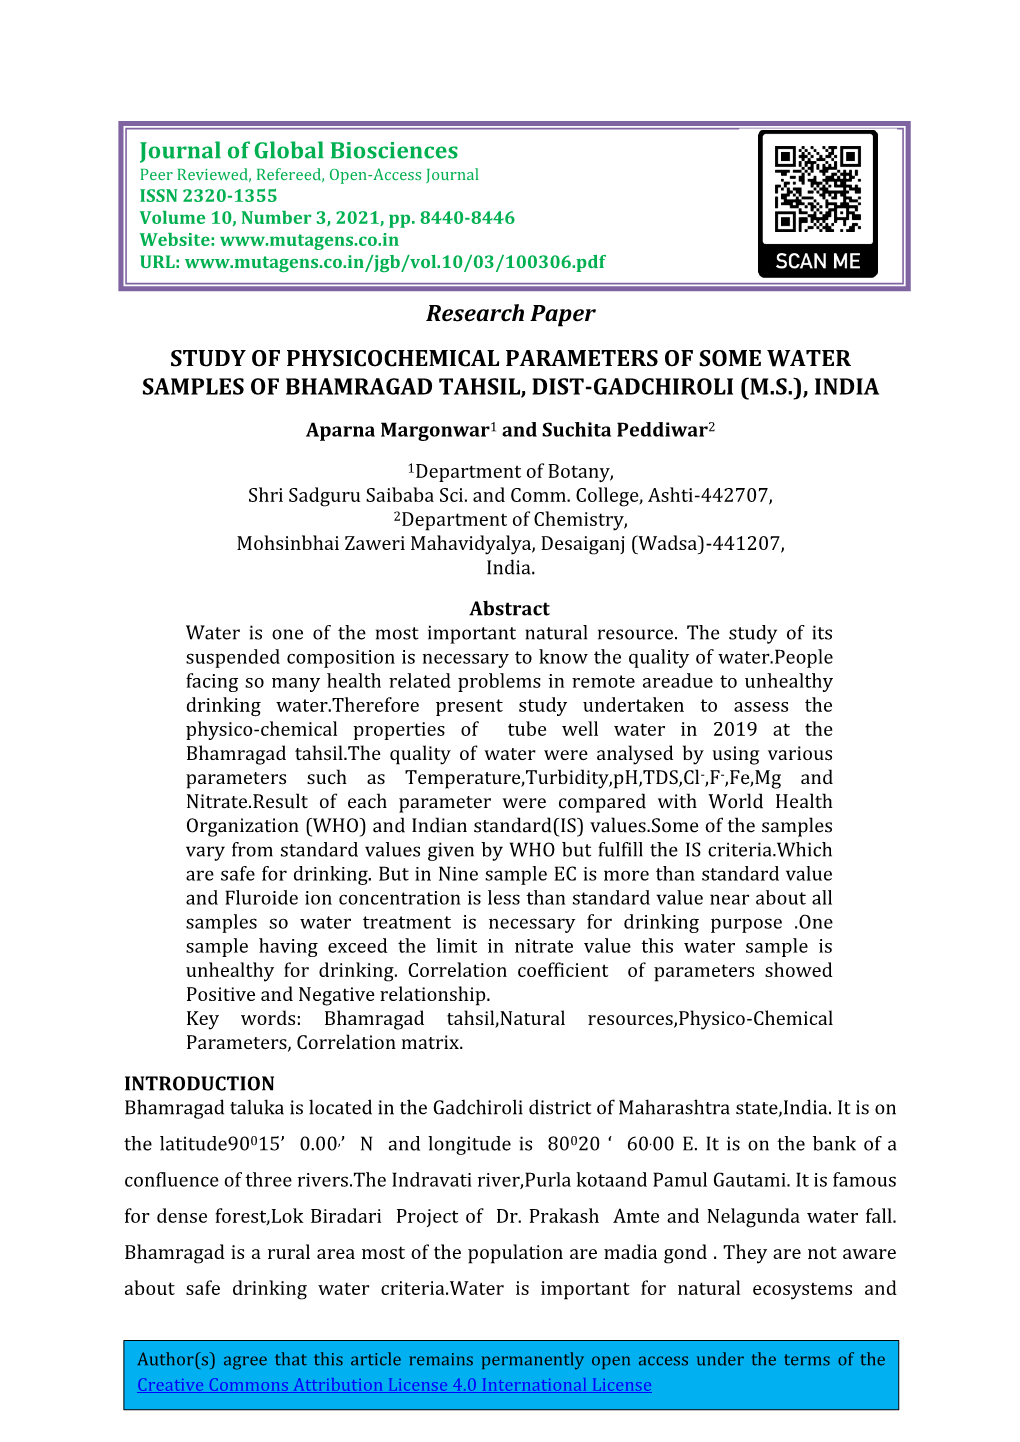 Research Paper STUDY of PHYSICOCHEMICAL PARAMETERS of SOME WATER SAMPLES of BHAMRAGAD TAHSIL, DIST-GADCHIROLI (M.S.), INDIA